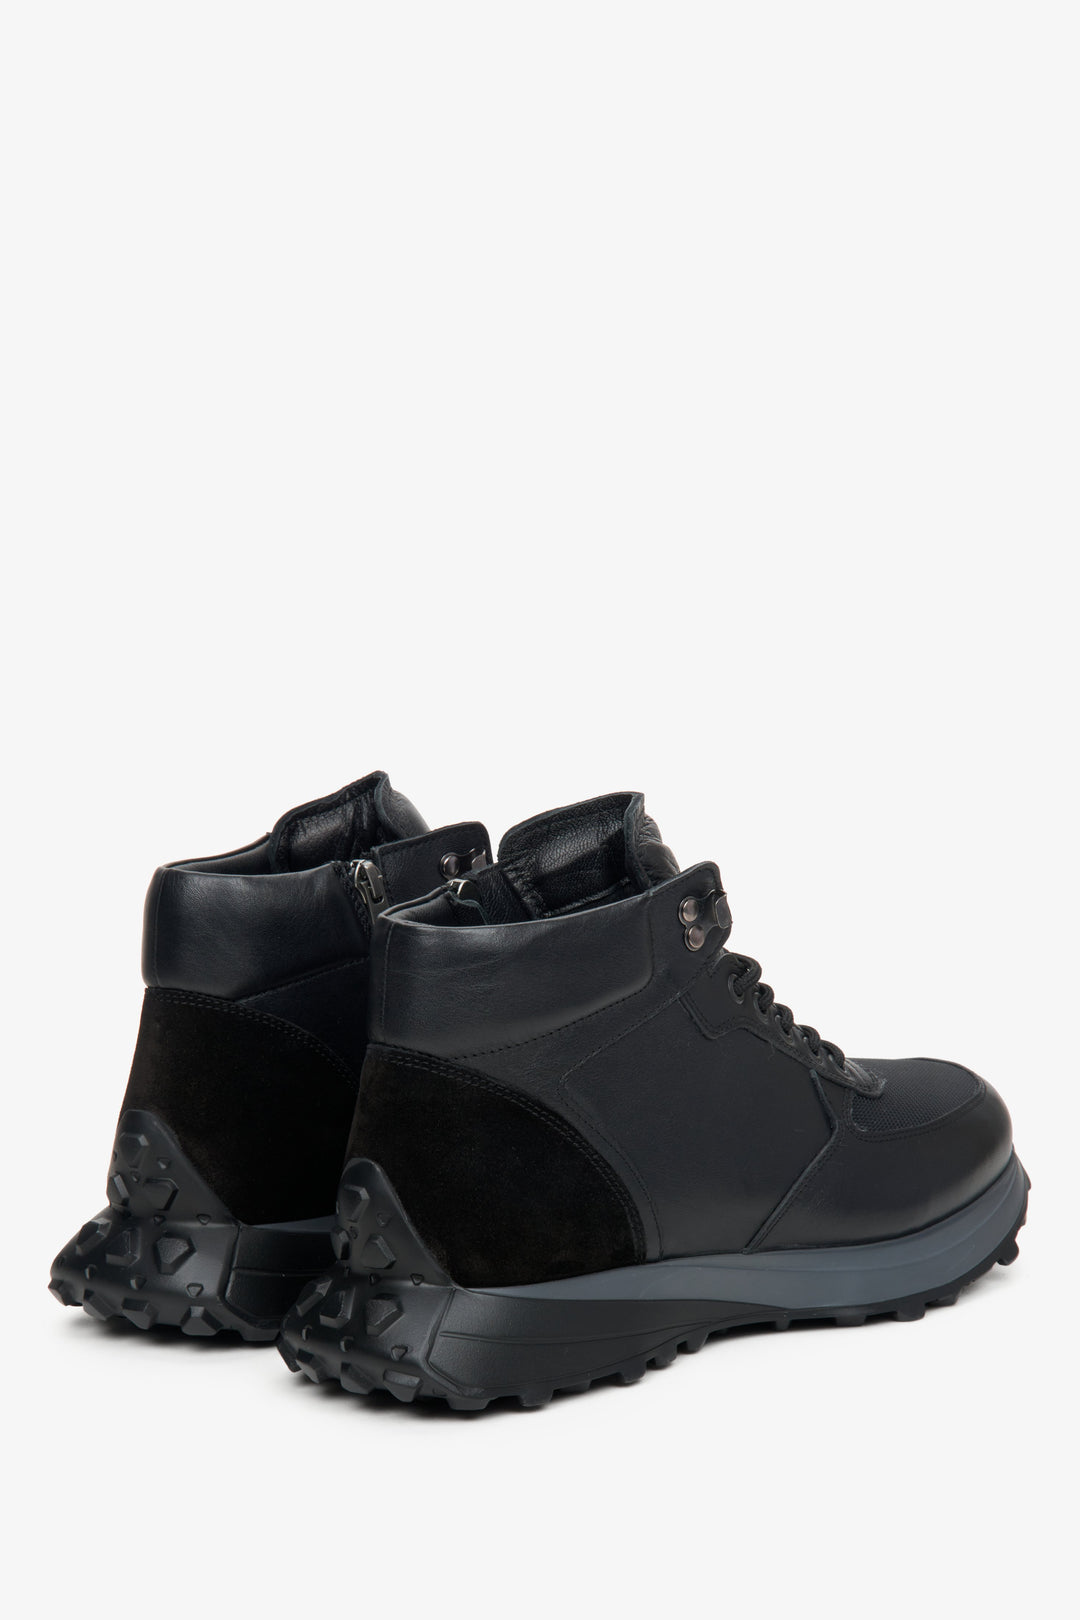 Men's black high-top sneakers by Estro - close-up on the heel counter.